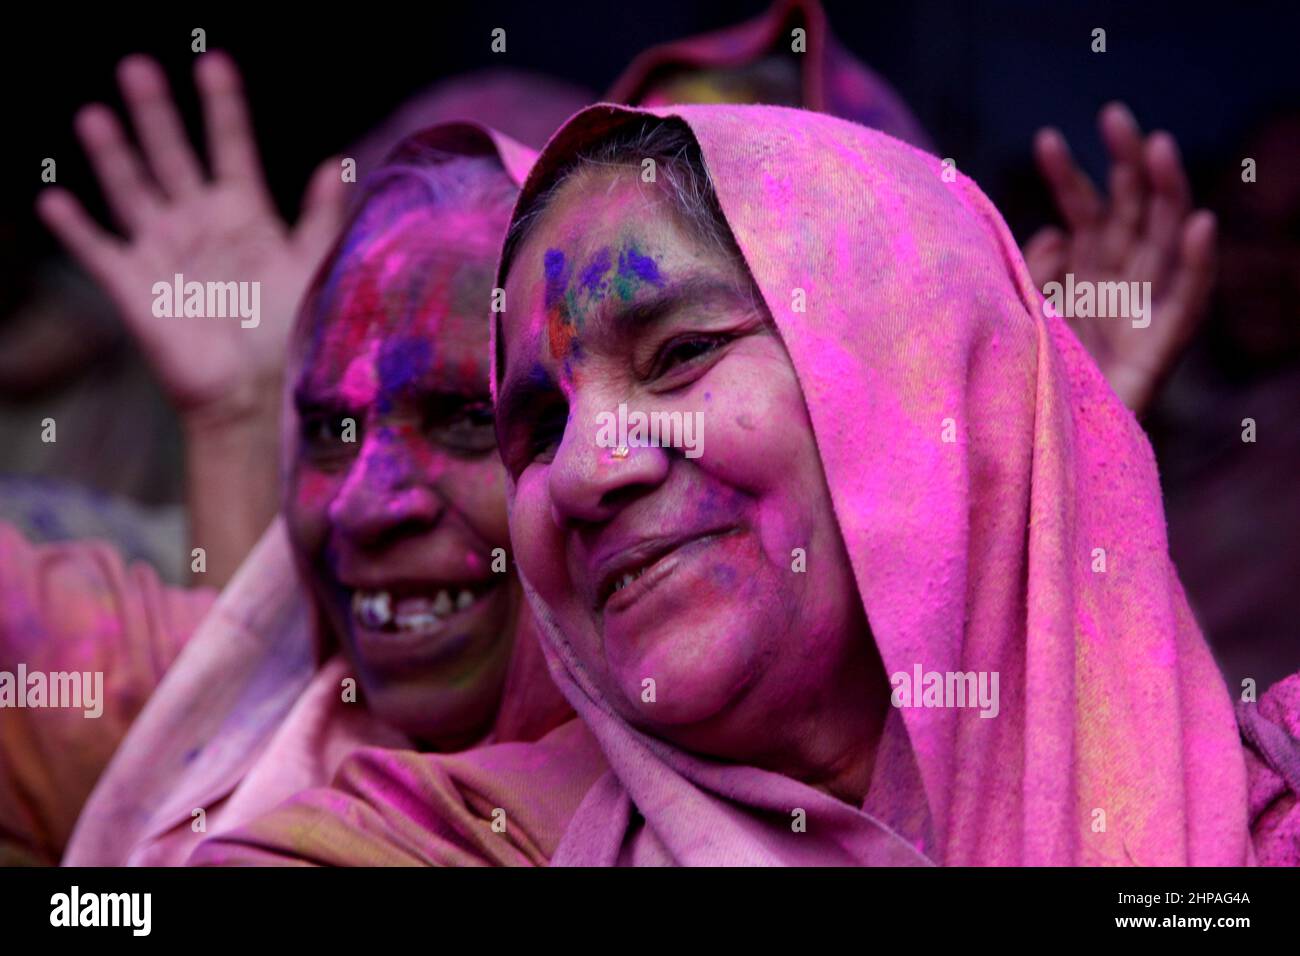 Indian widow women celebrate Holi festival in a old age home for widow women in Vrindavan, India in 2015. Stock Photo